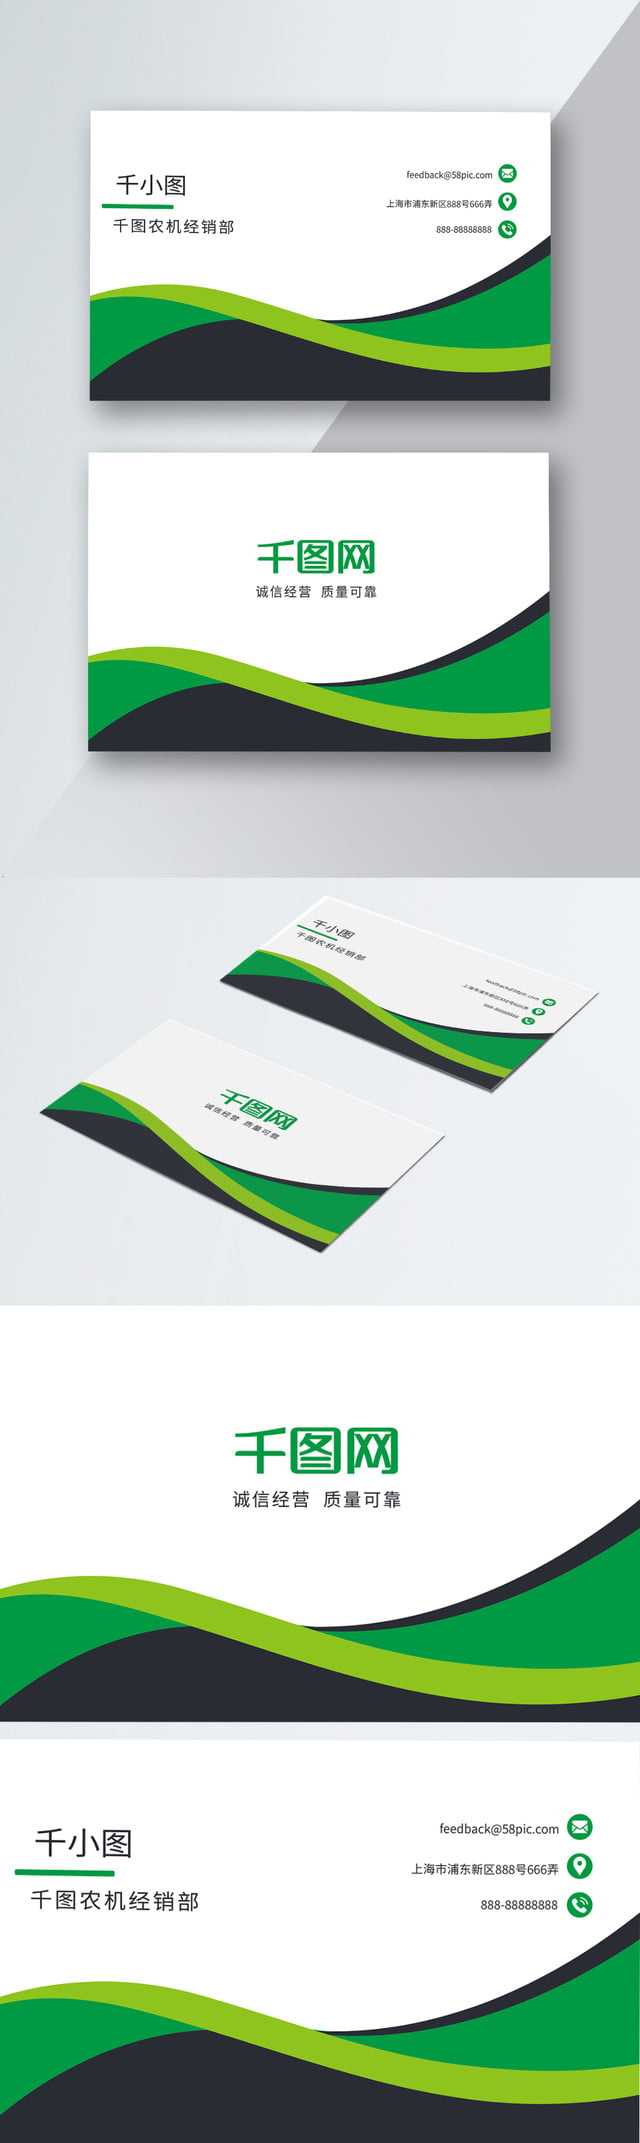 Agricultural Machine Business Card Material Download In Download Visiting Card Templates